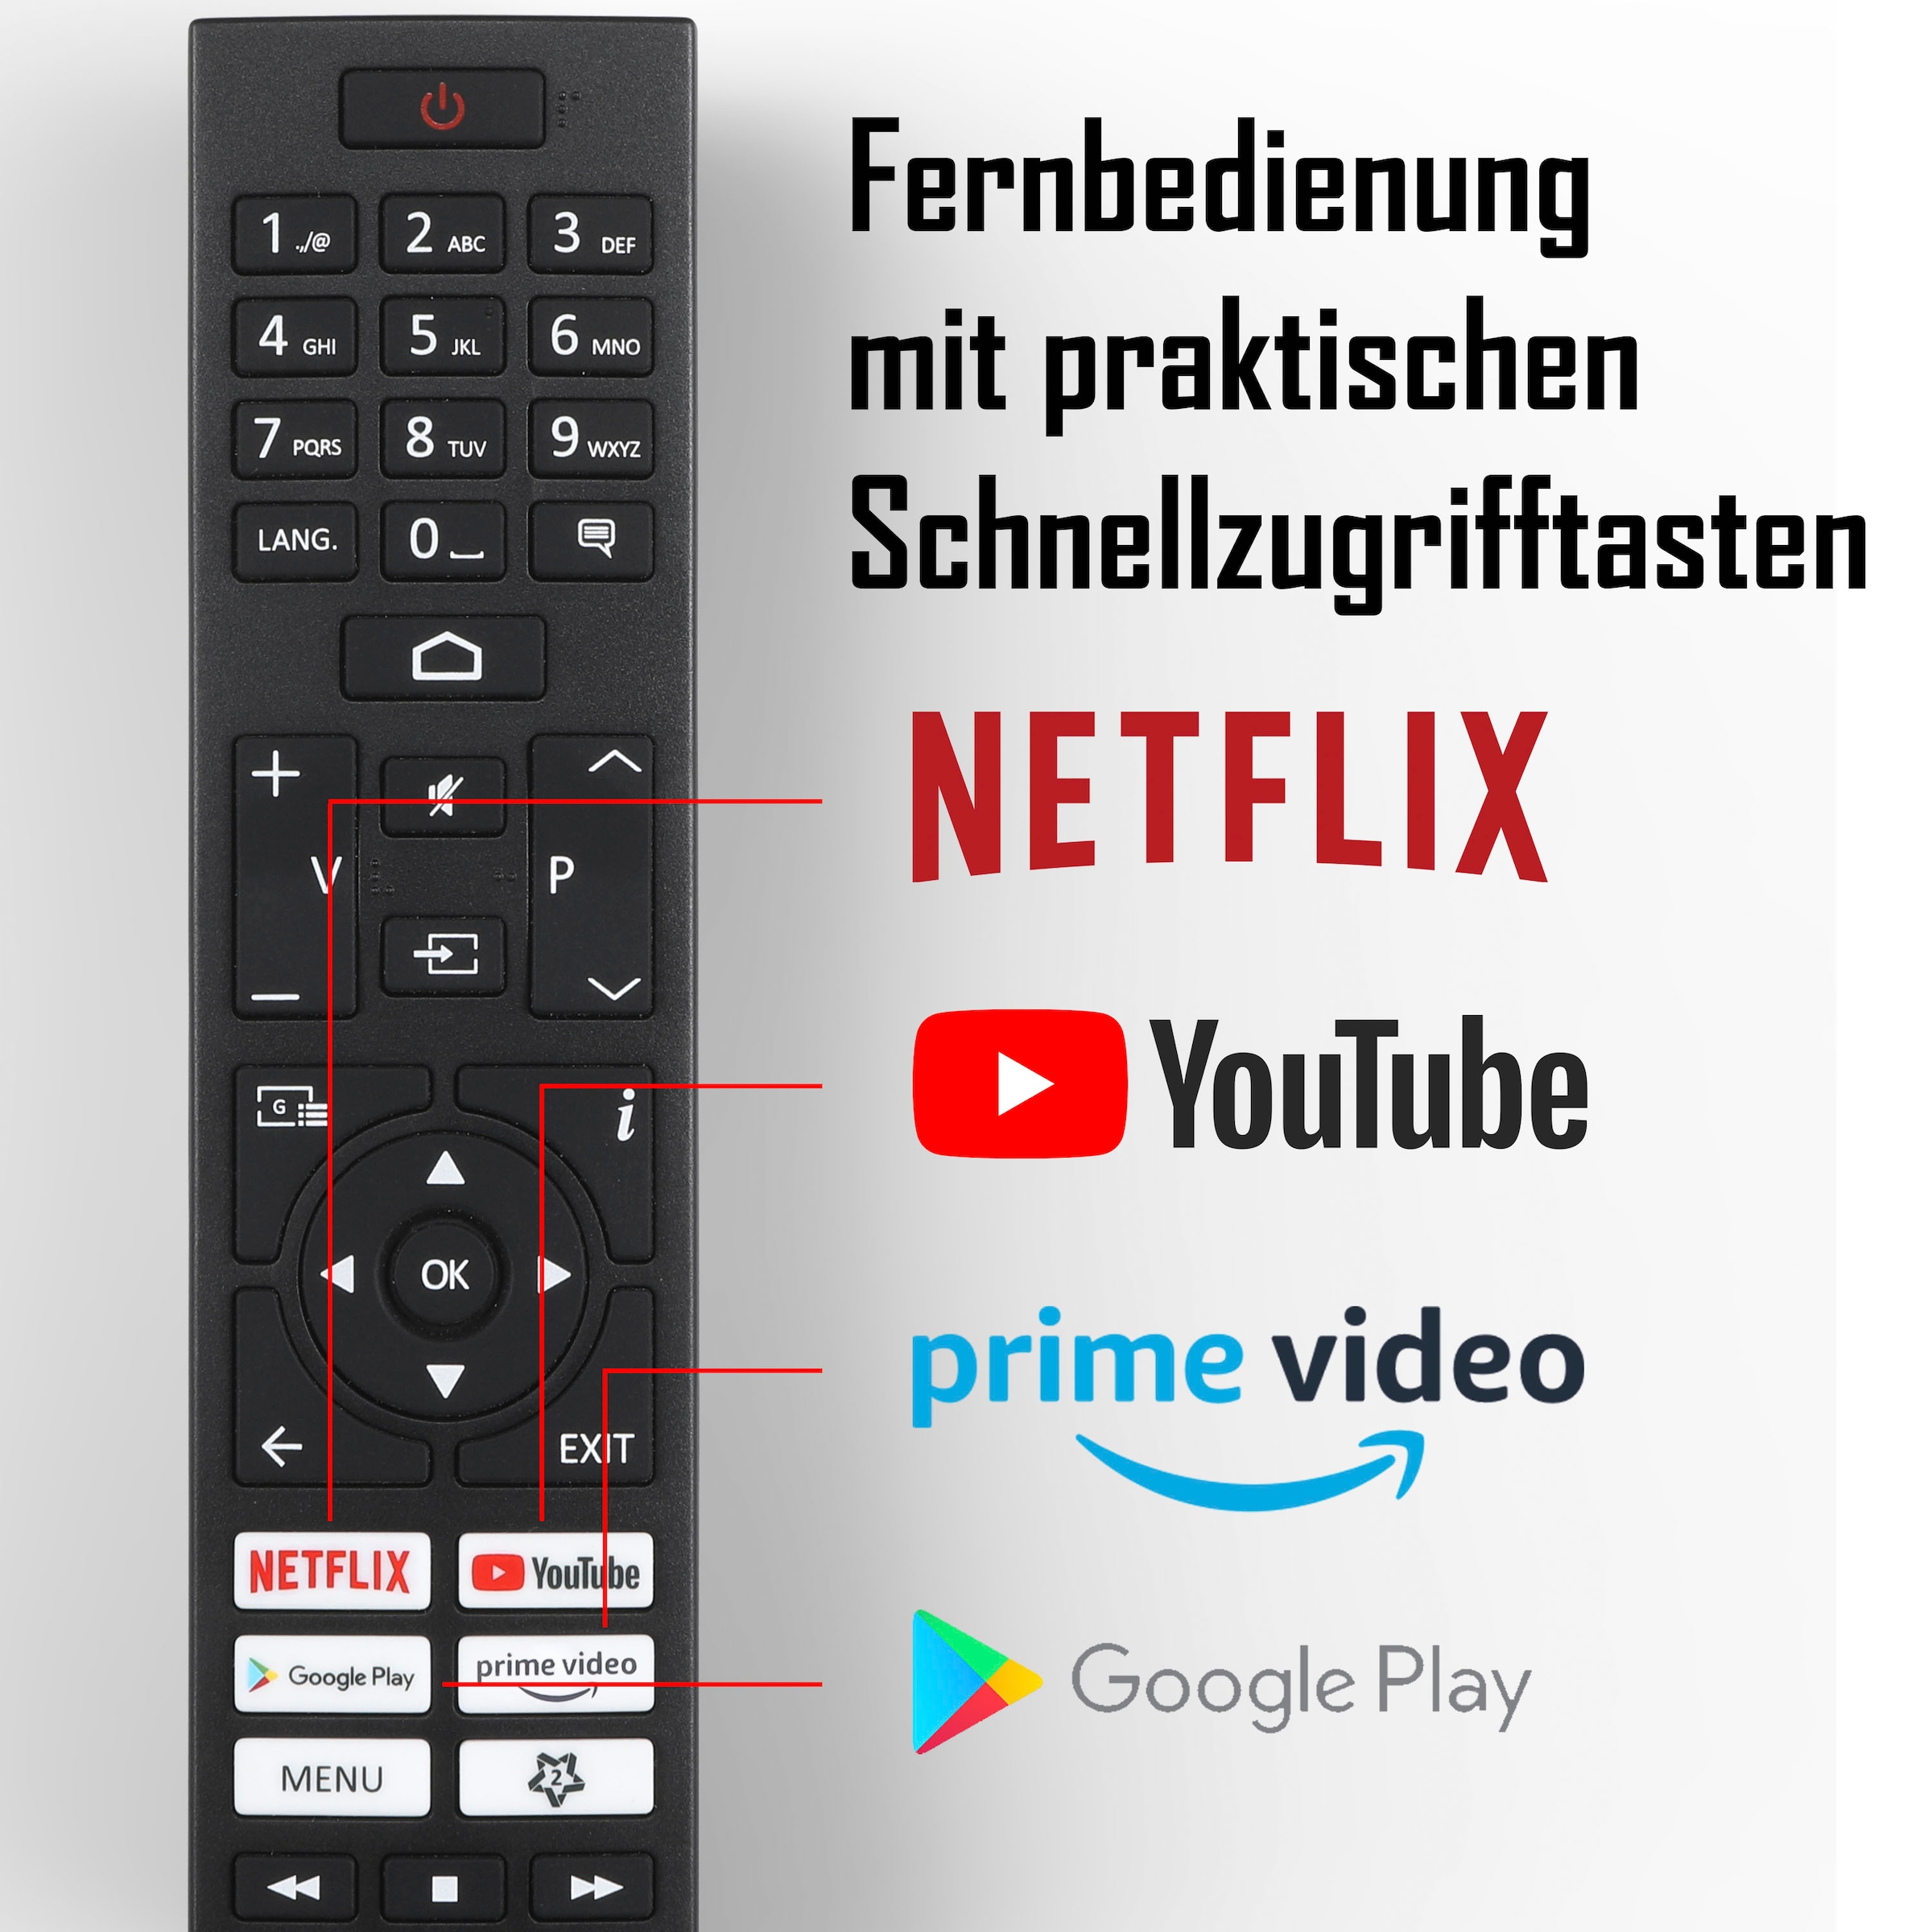 JVC LCD-LED Fernseher »LT-24VAH3255«, kaufen Smart-TV cm/24 bei OTTO 60 Zoll, Android TV- jetzt ready, HD